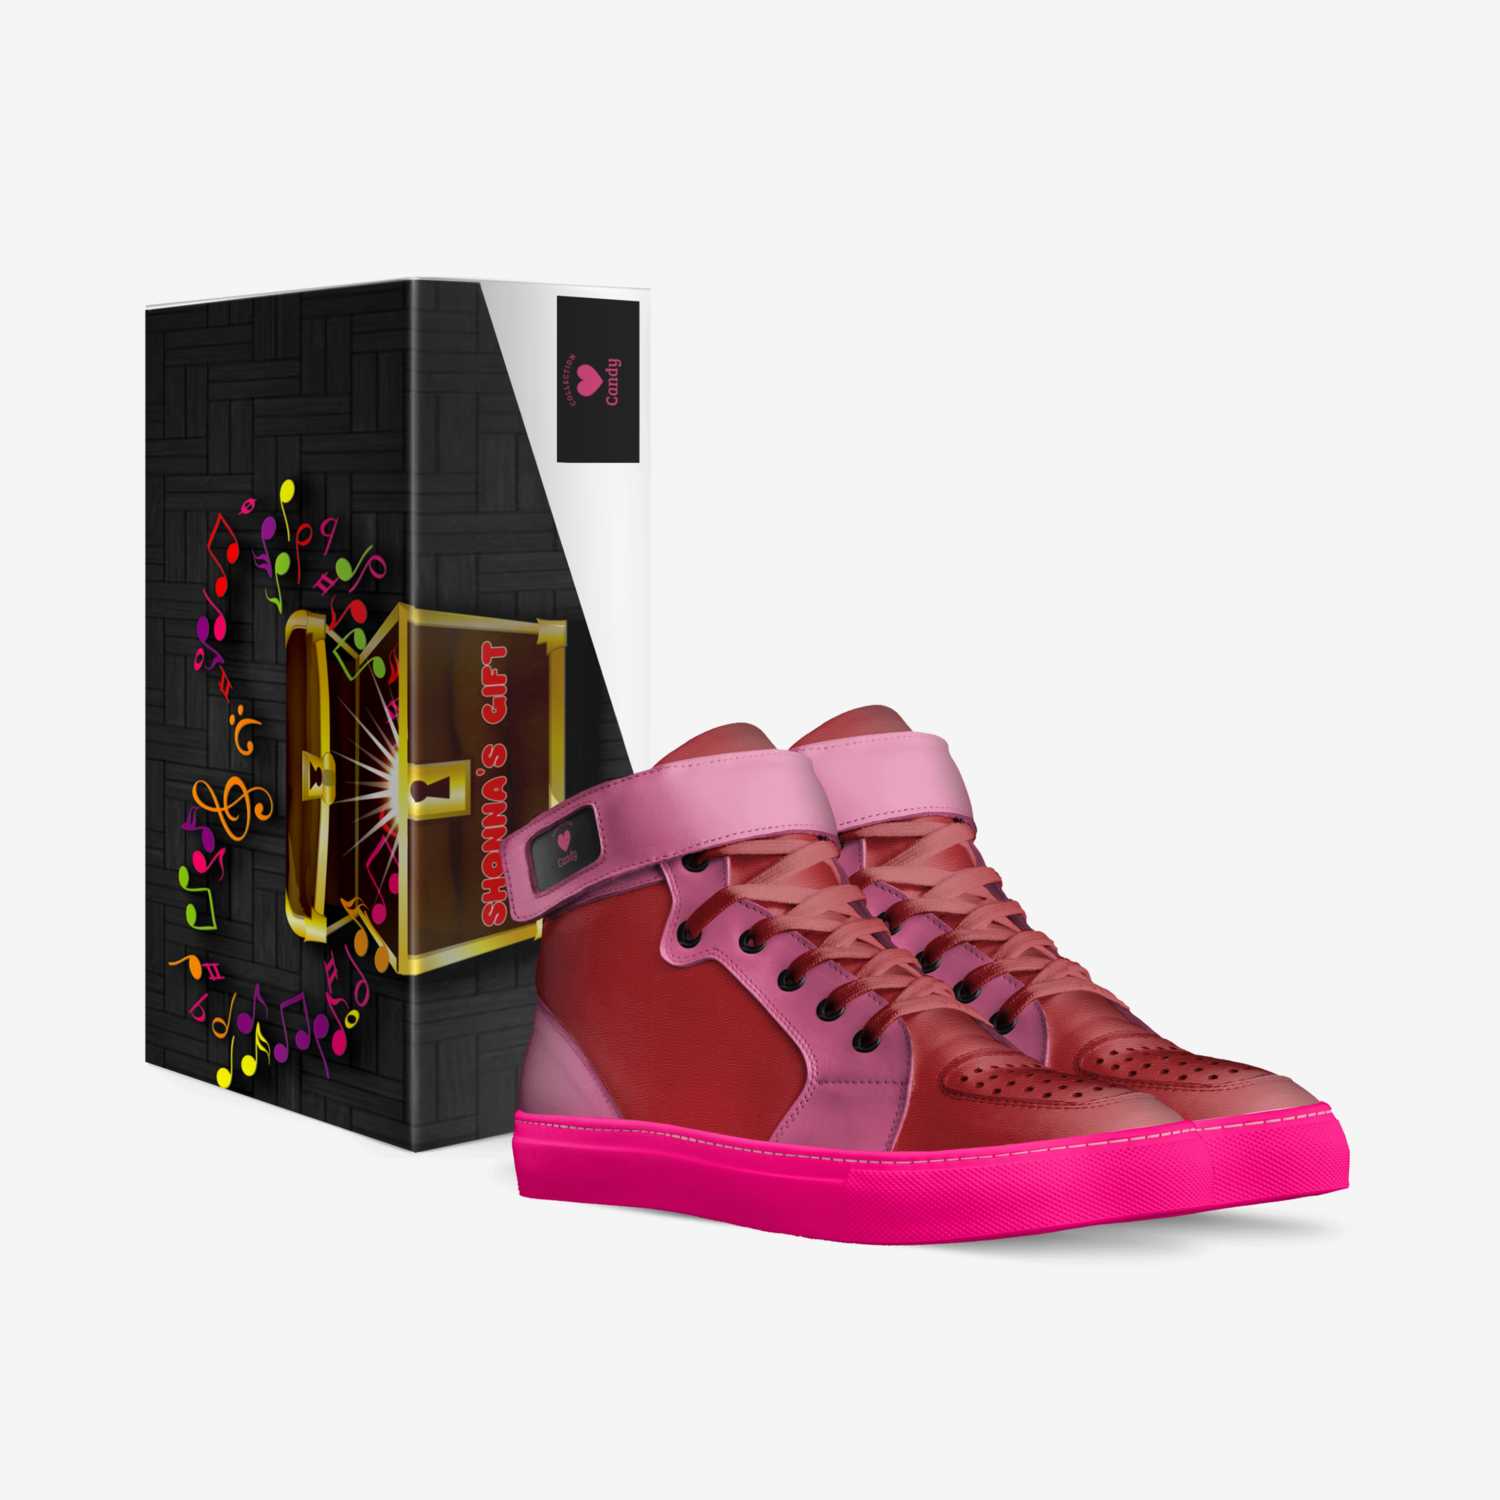 Candy custom made in Italy shoes by Shonna Lawler | Box view